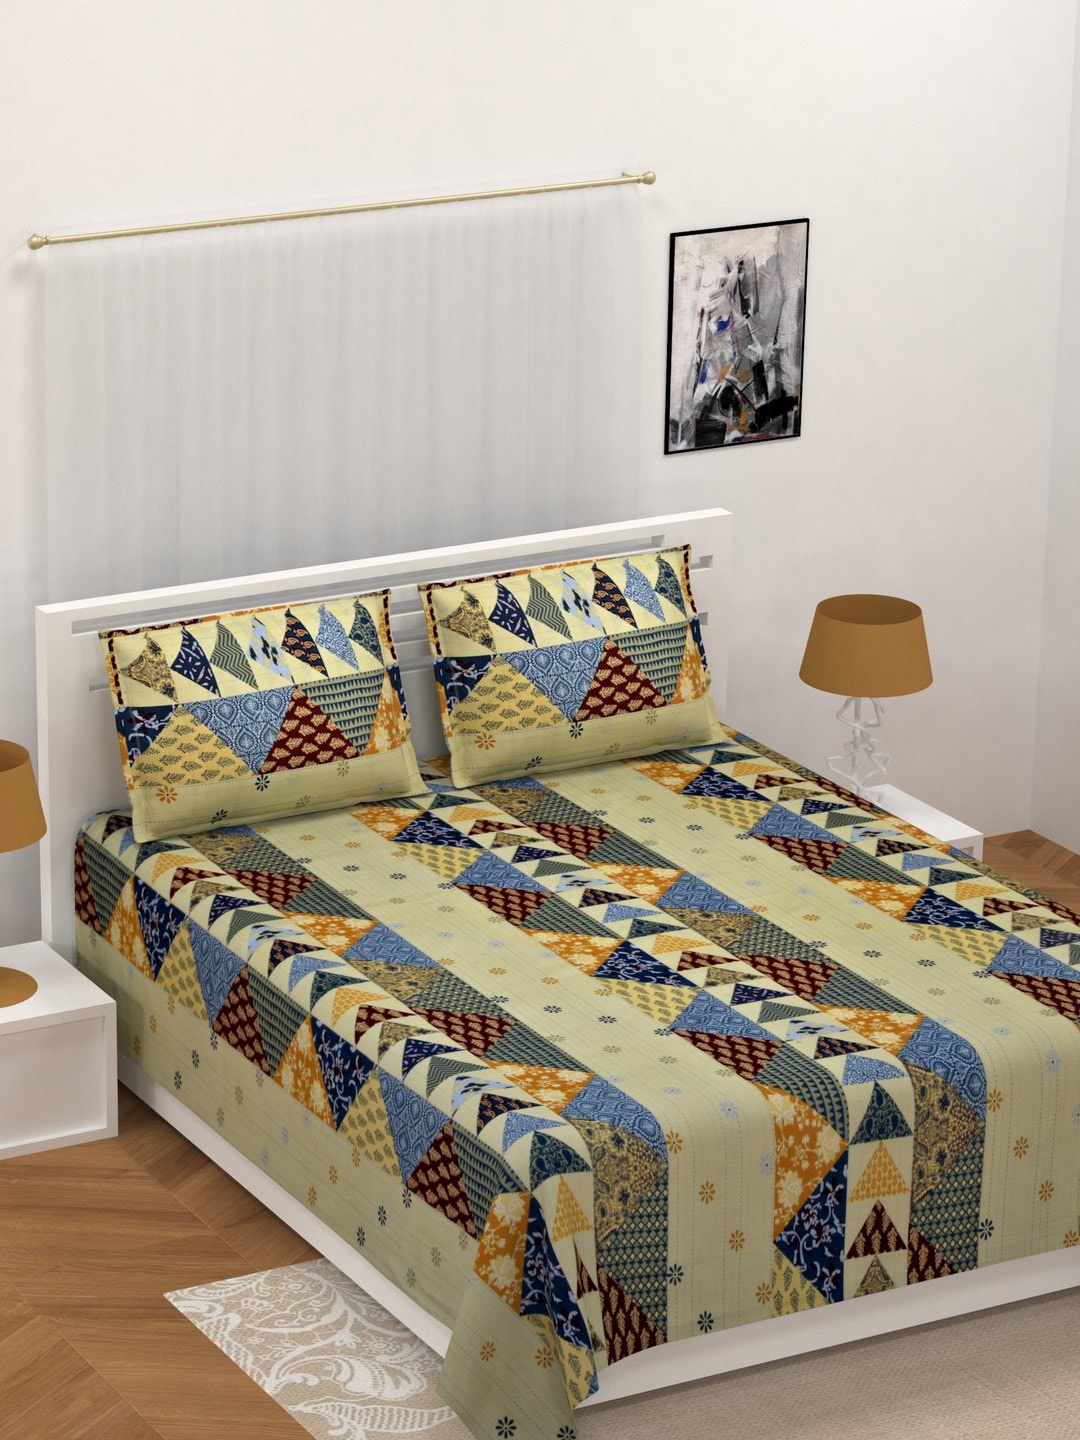 eCraftIndia Beige & Blue Kantha Patchwork Printed 210 TC Cotton Double King Bedsheet With 2 Pillow Covers Price in India